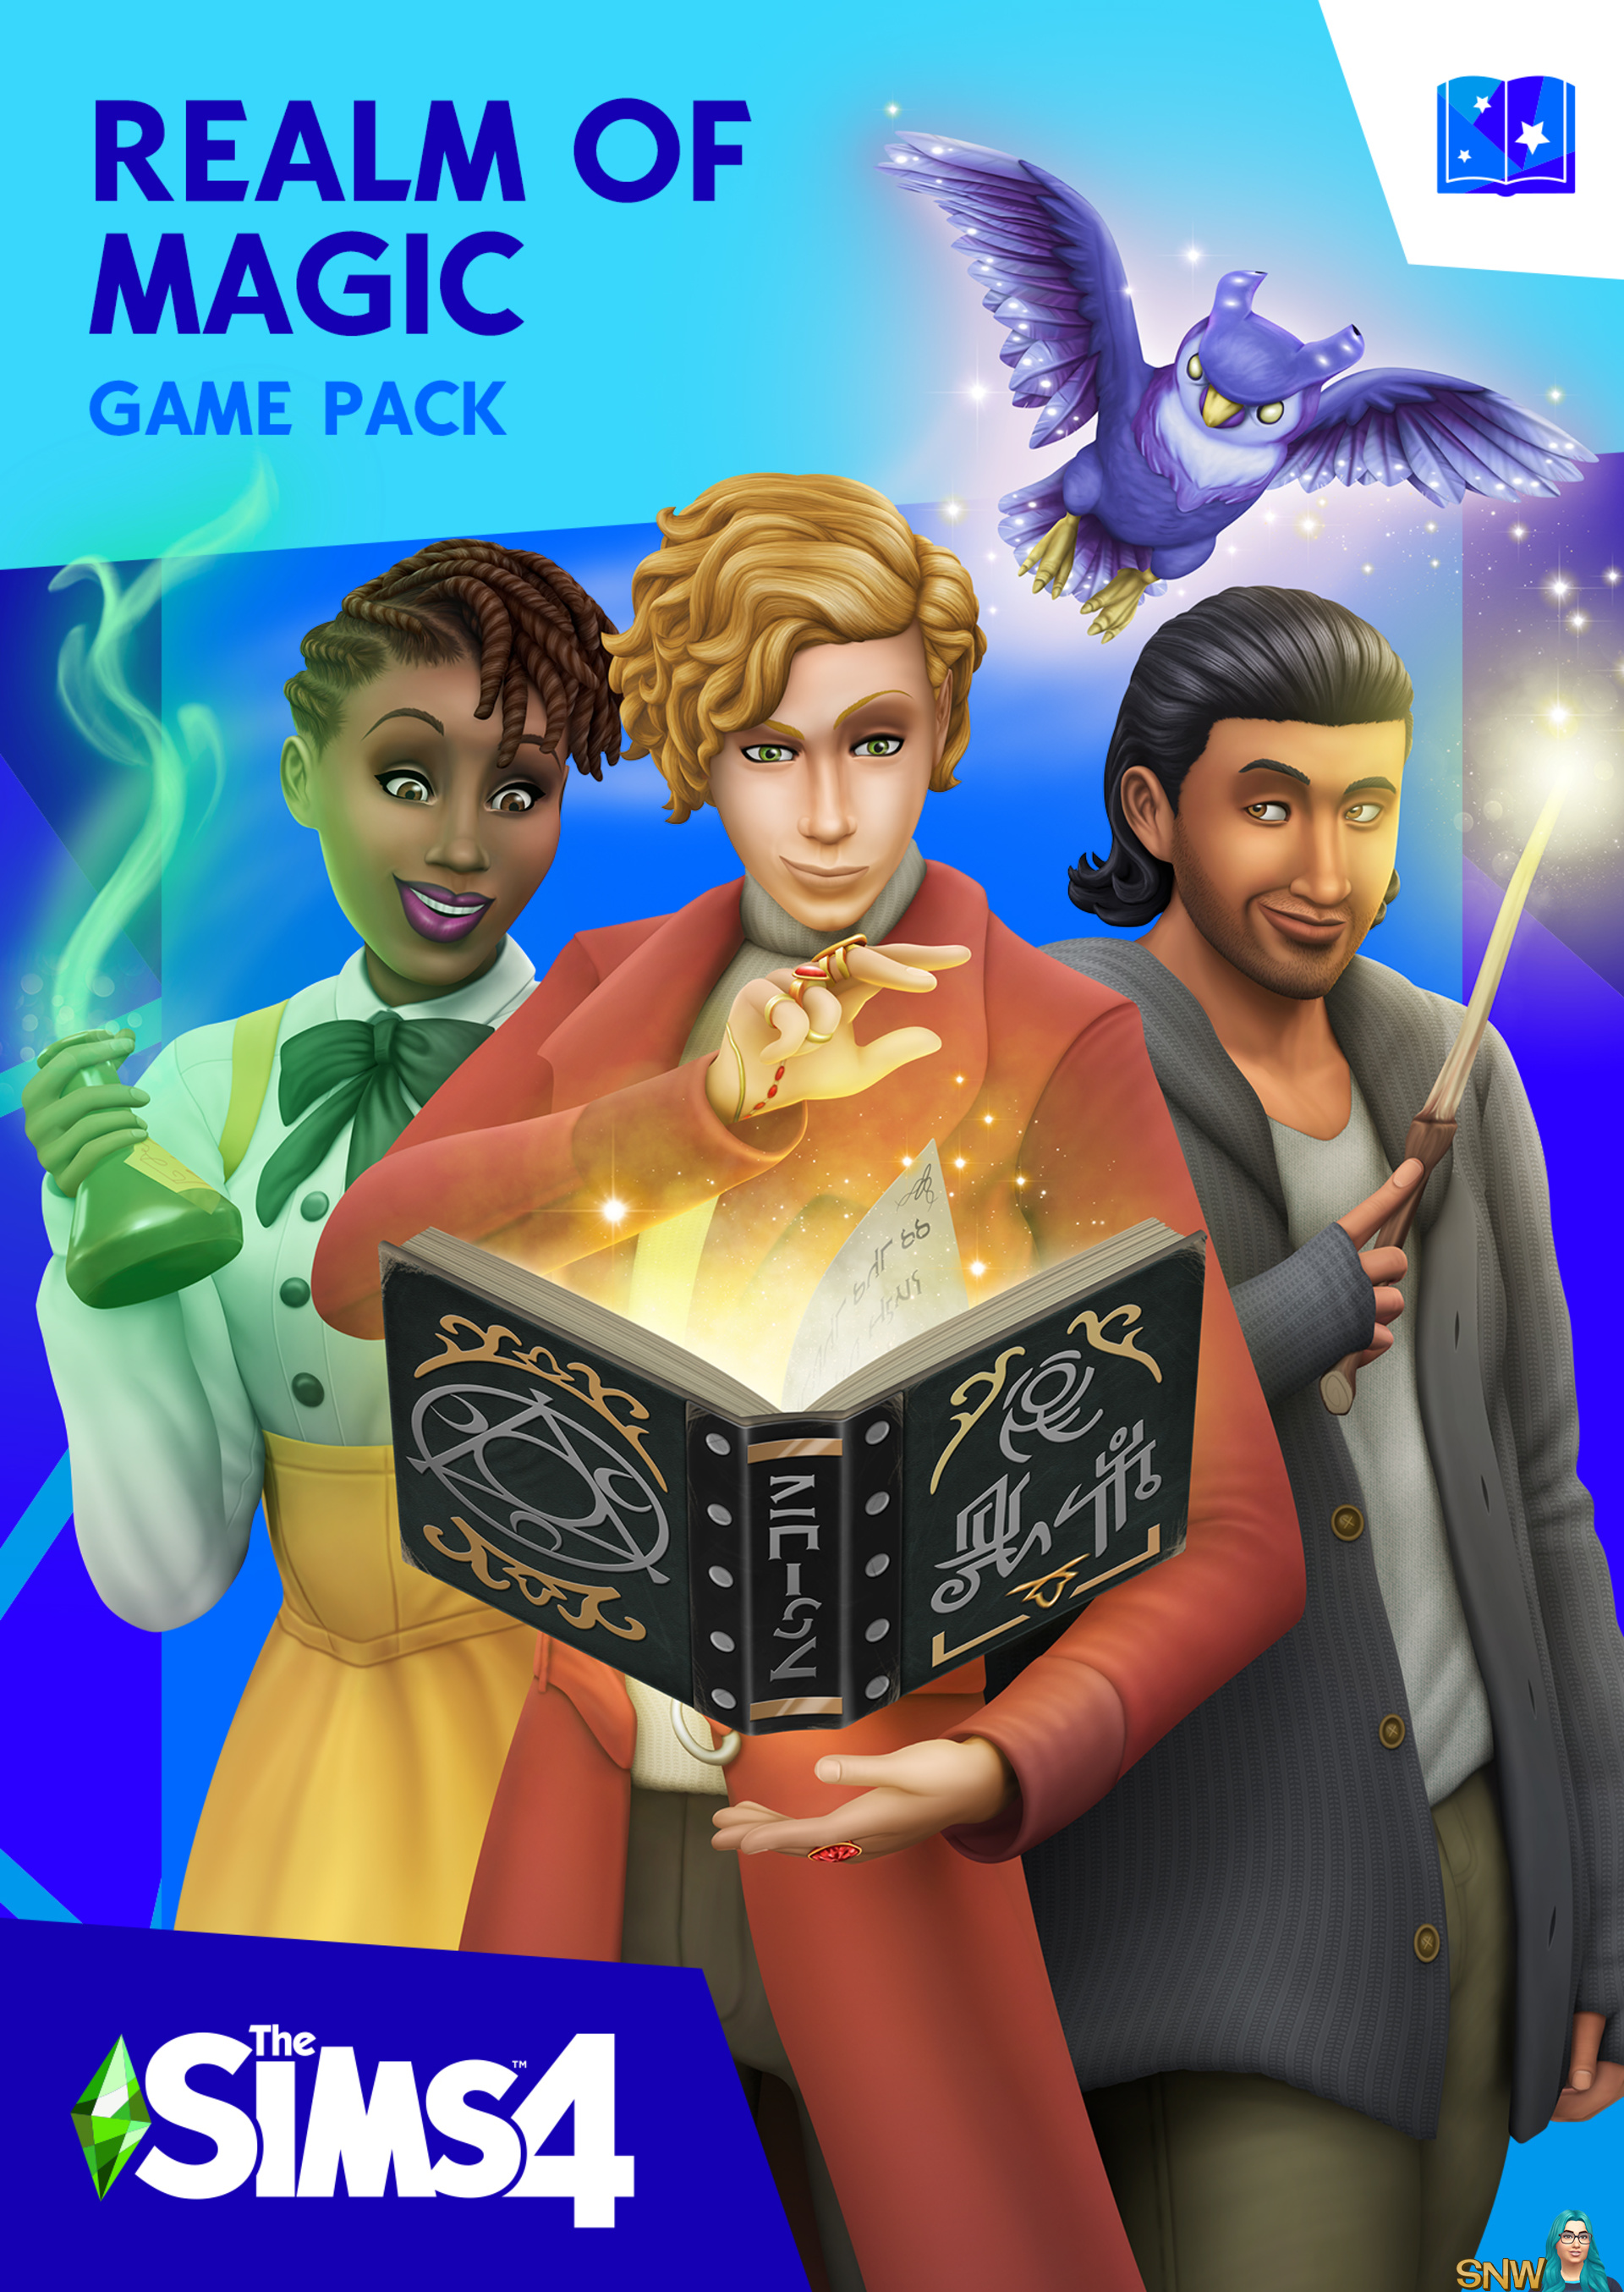 The Sims 4: Realm of Magic | SNW | SimsNetwork.com